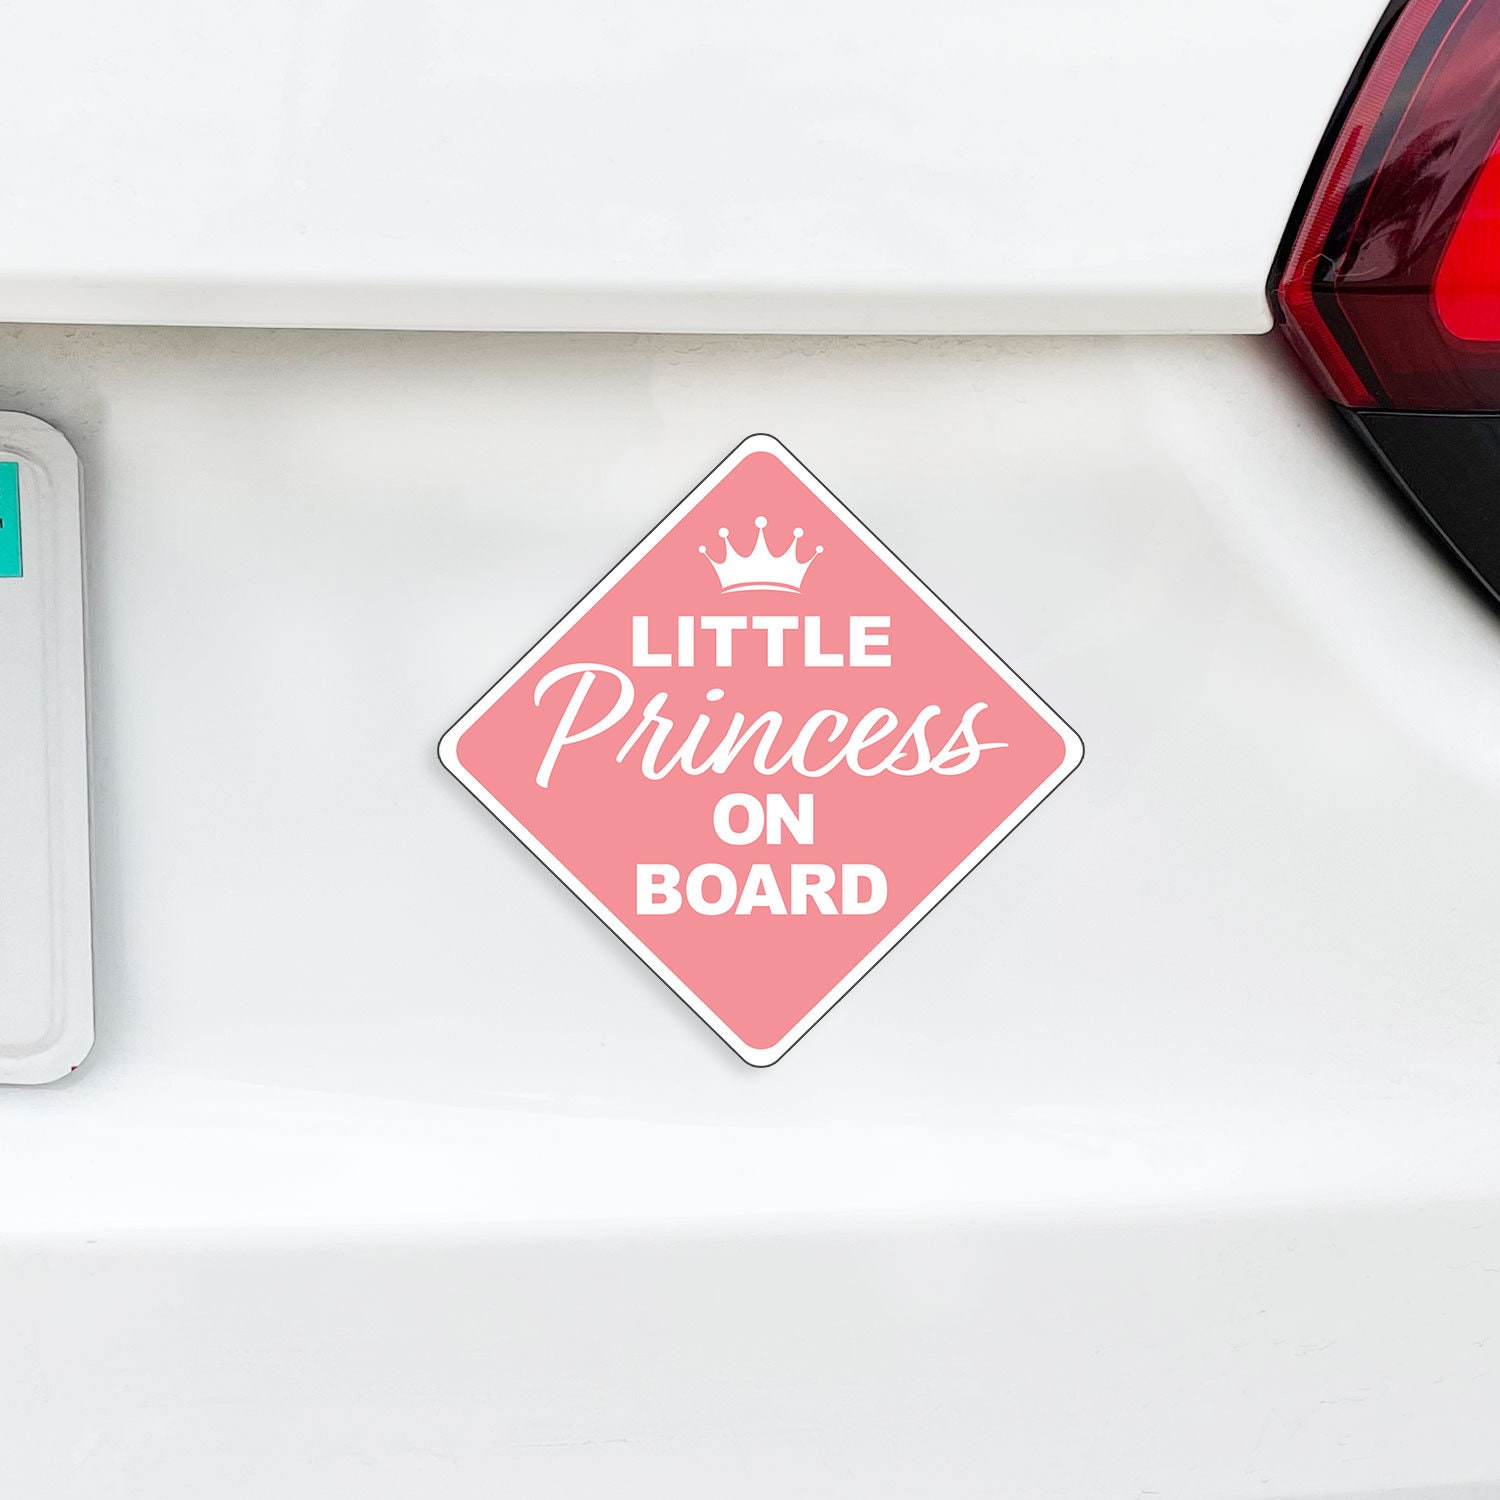 PRINCESS BABY ON BOARD PINK FLOWERS GIRL CHILD SAFETY STICKER CAR VEHICLE SIGNS 